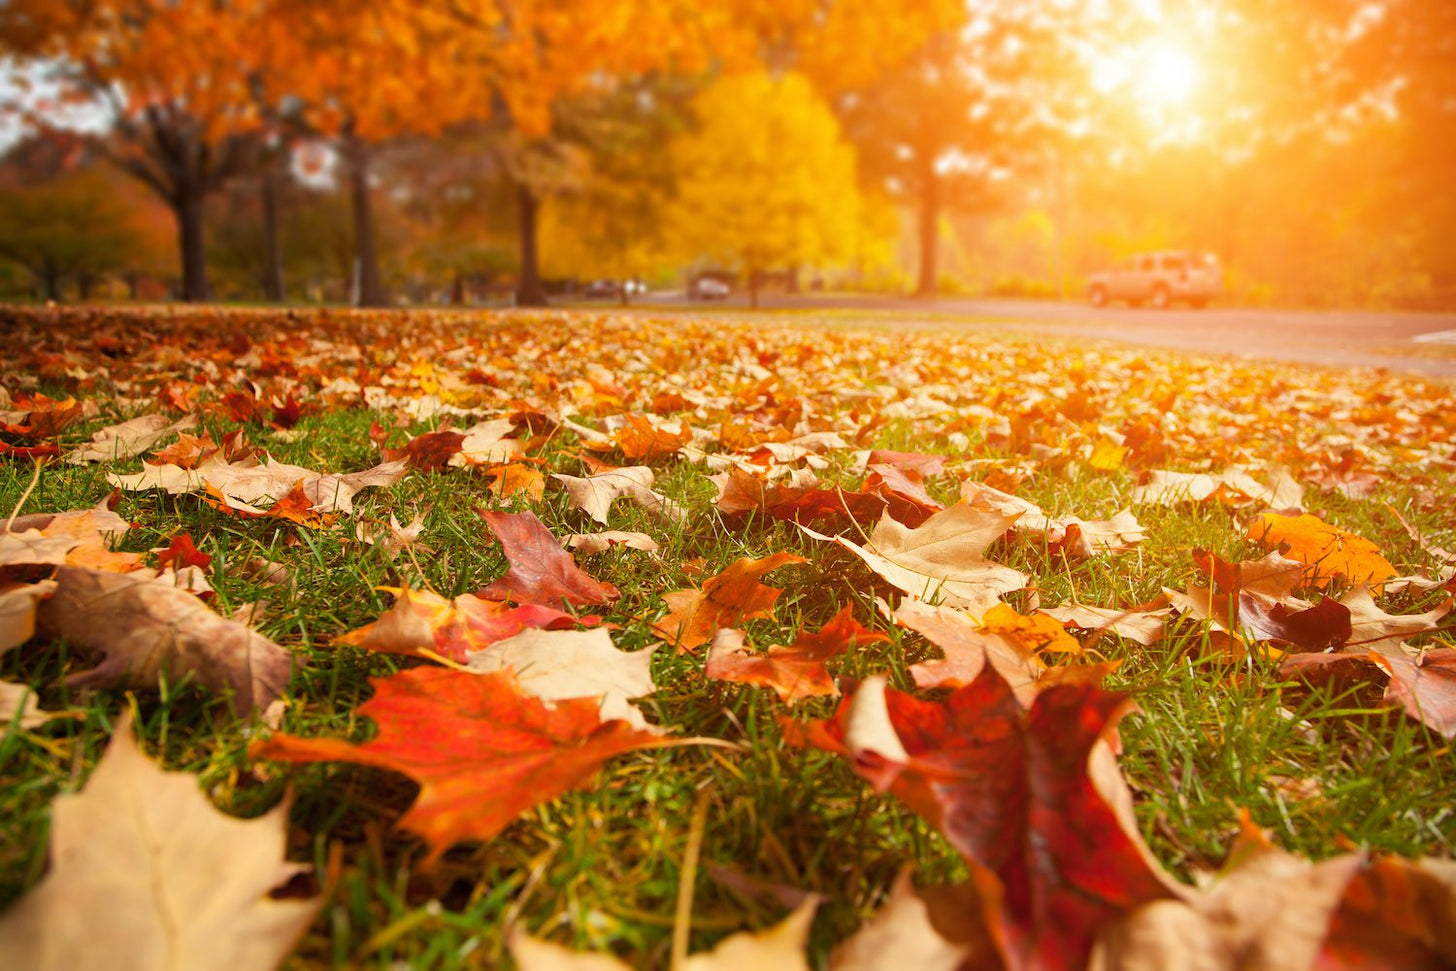 Autumn leaves strewn across a lush green lawn with the golden sun shining through the trees in the background